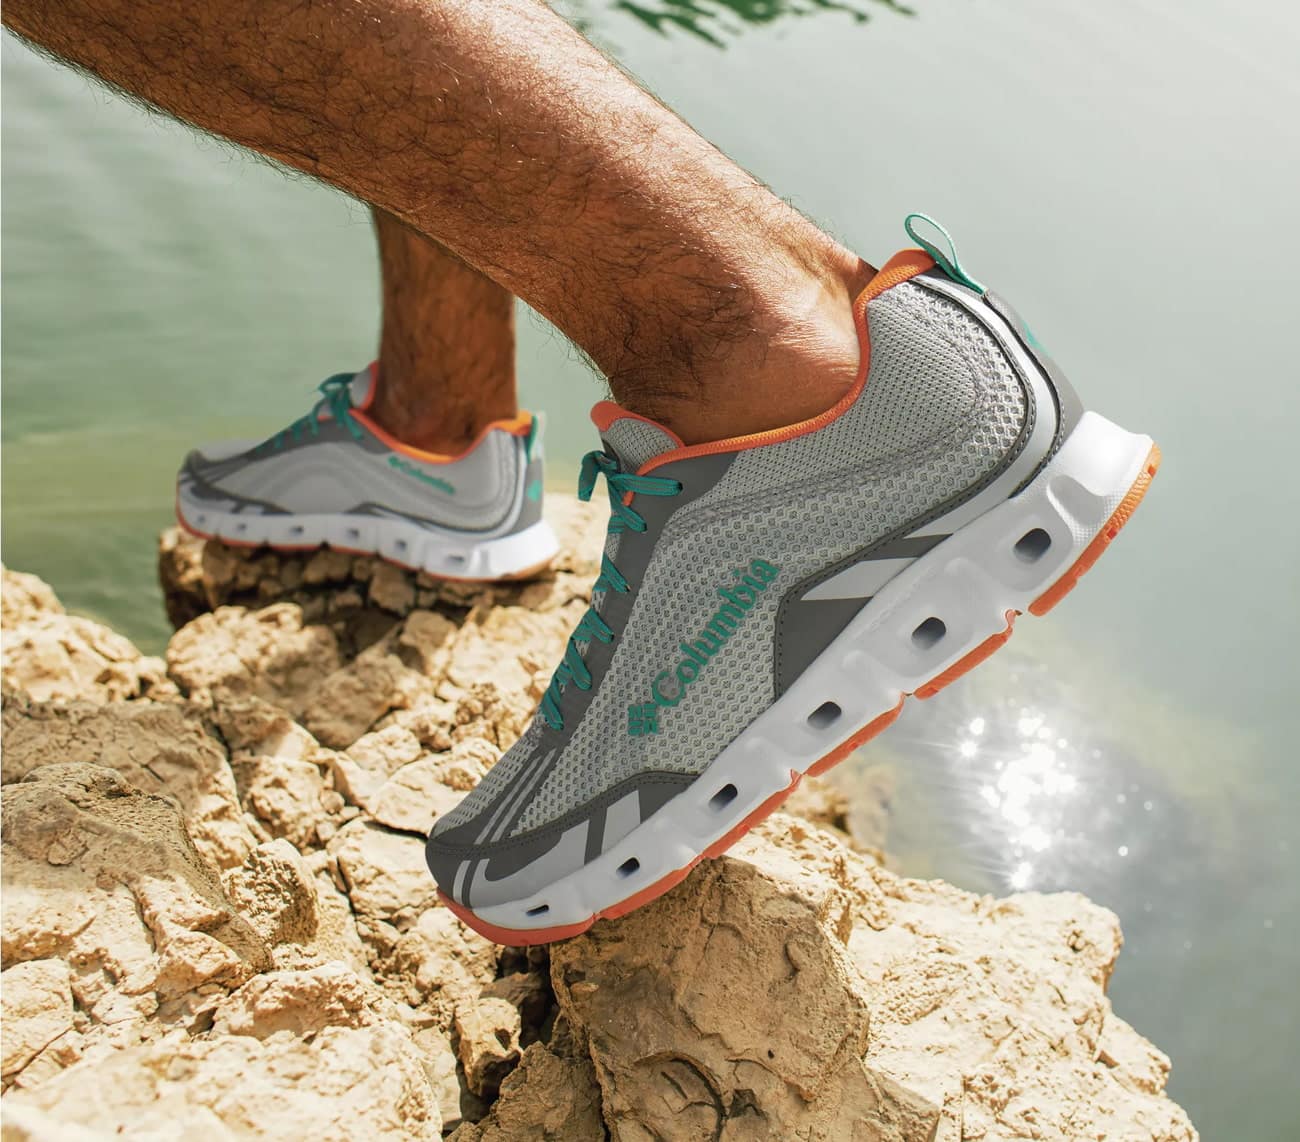 Best Water Shoes for Travel